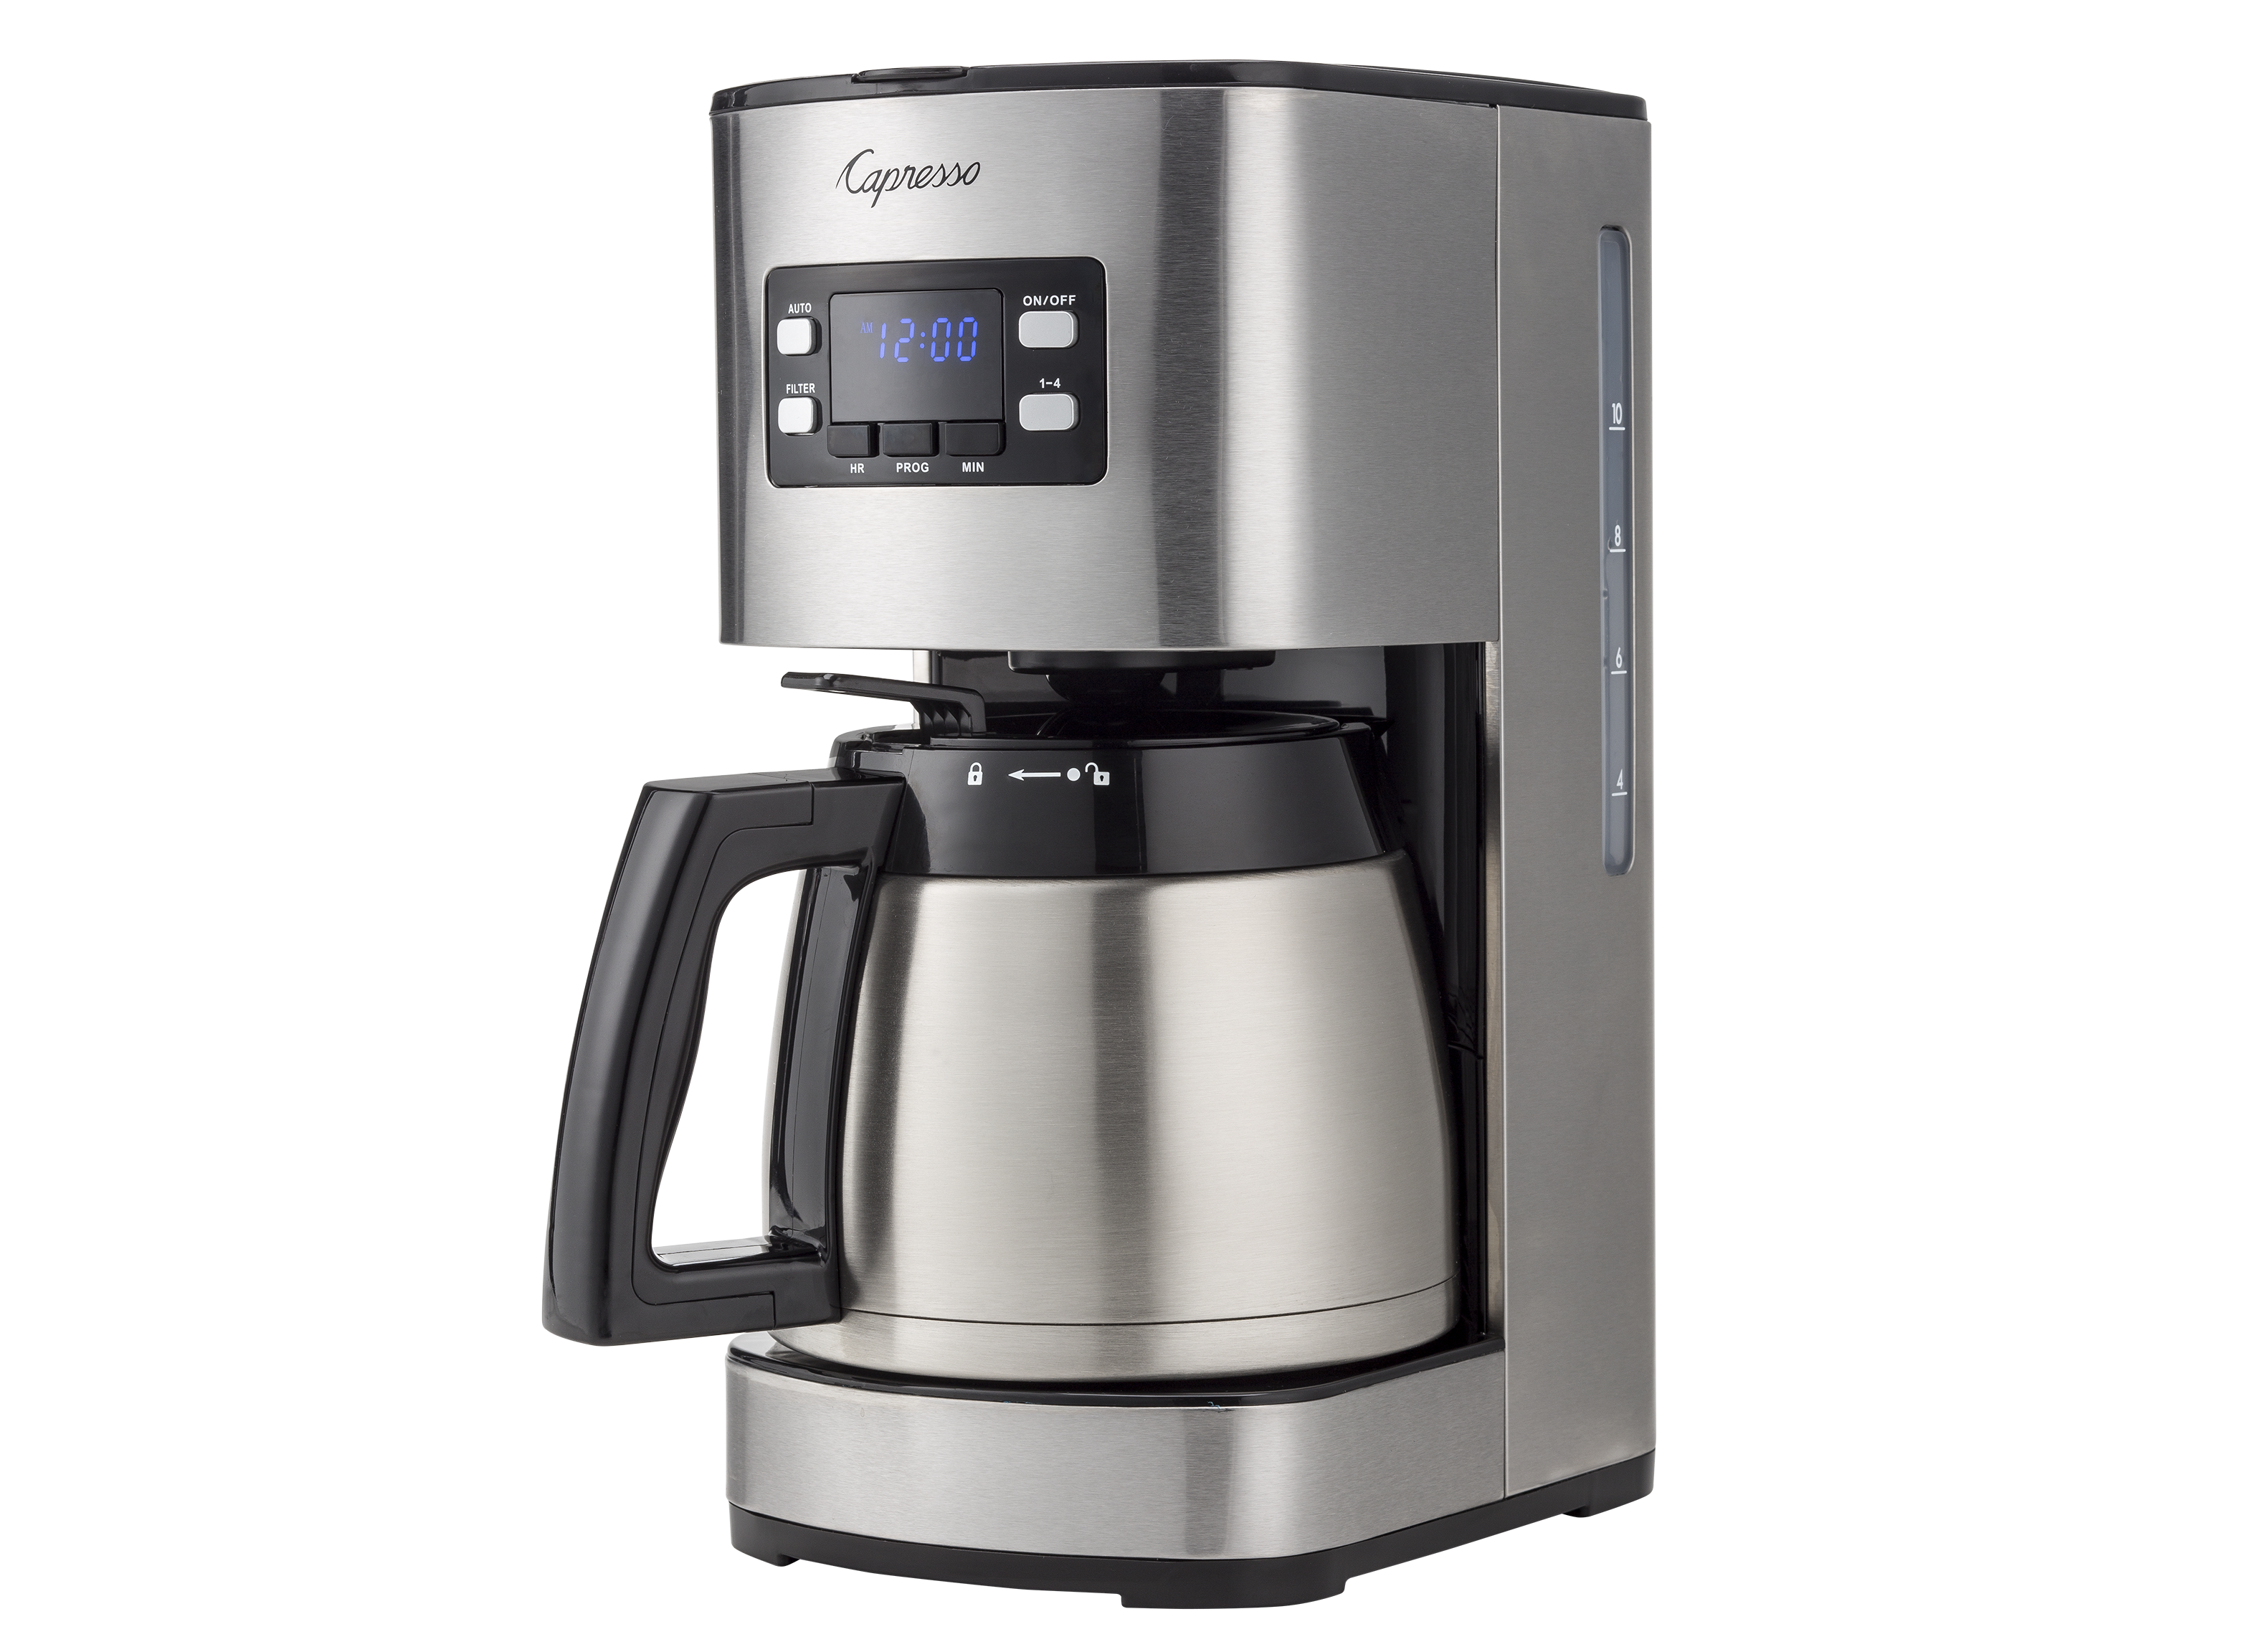 https://crdms.images.consumerreports.org/prod/products/cr/models/392438-coffeemakers-capresso-st300thermal.png